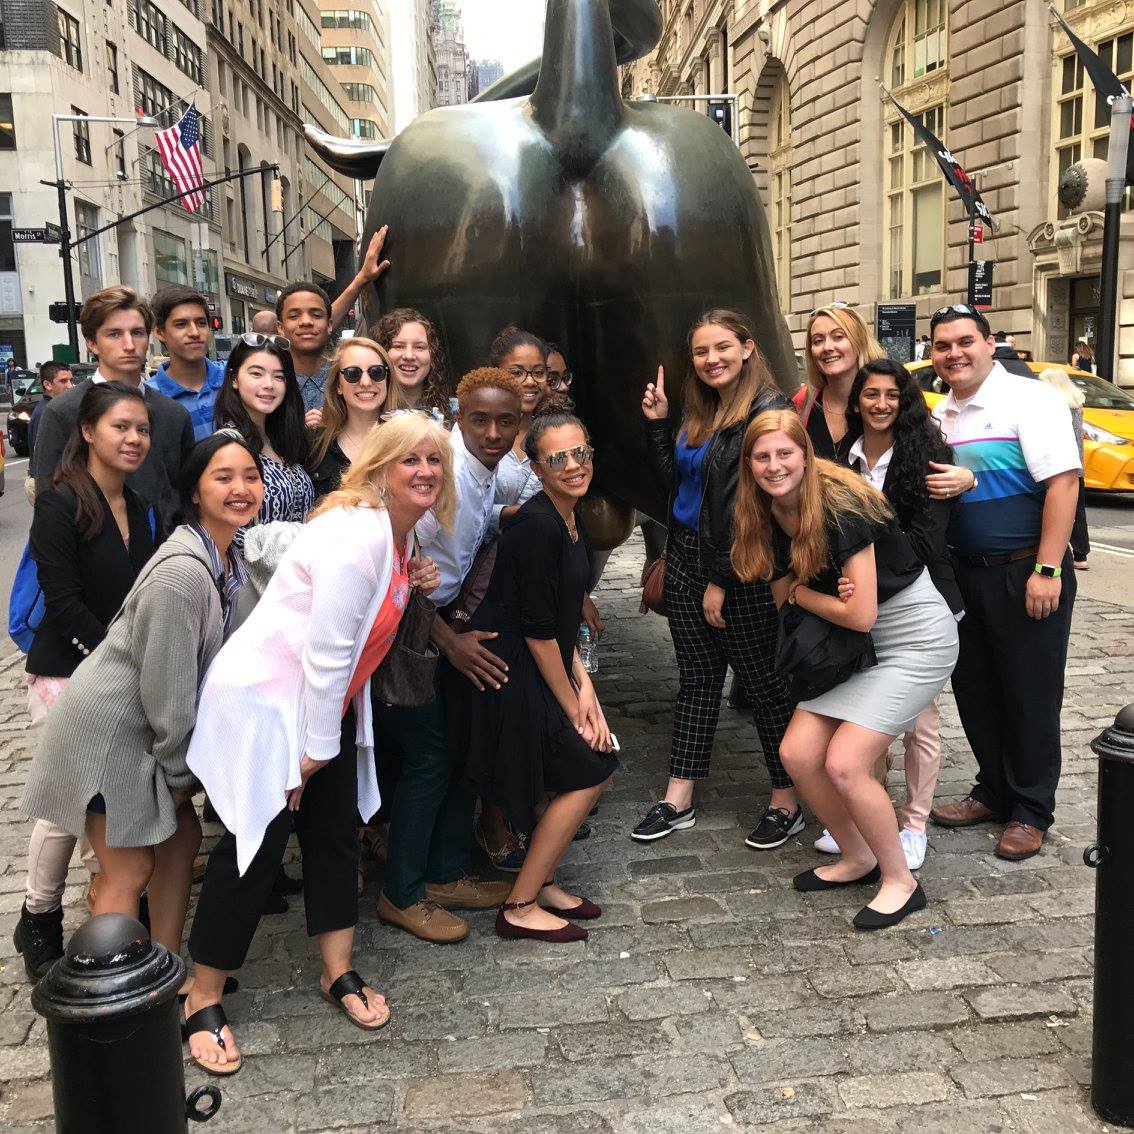 Group photo with Charging Bull